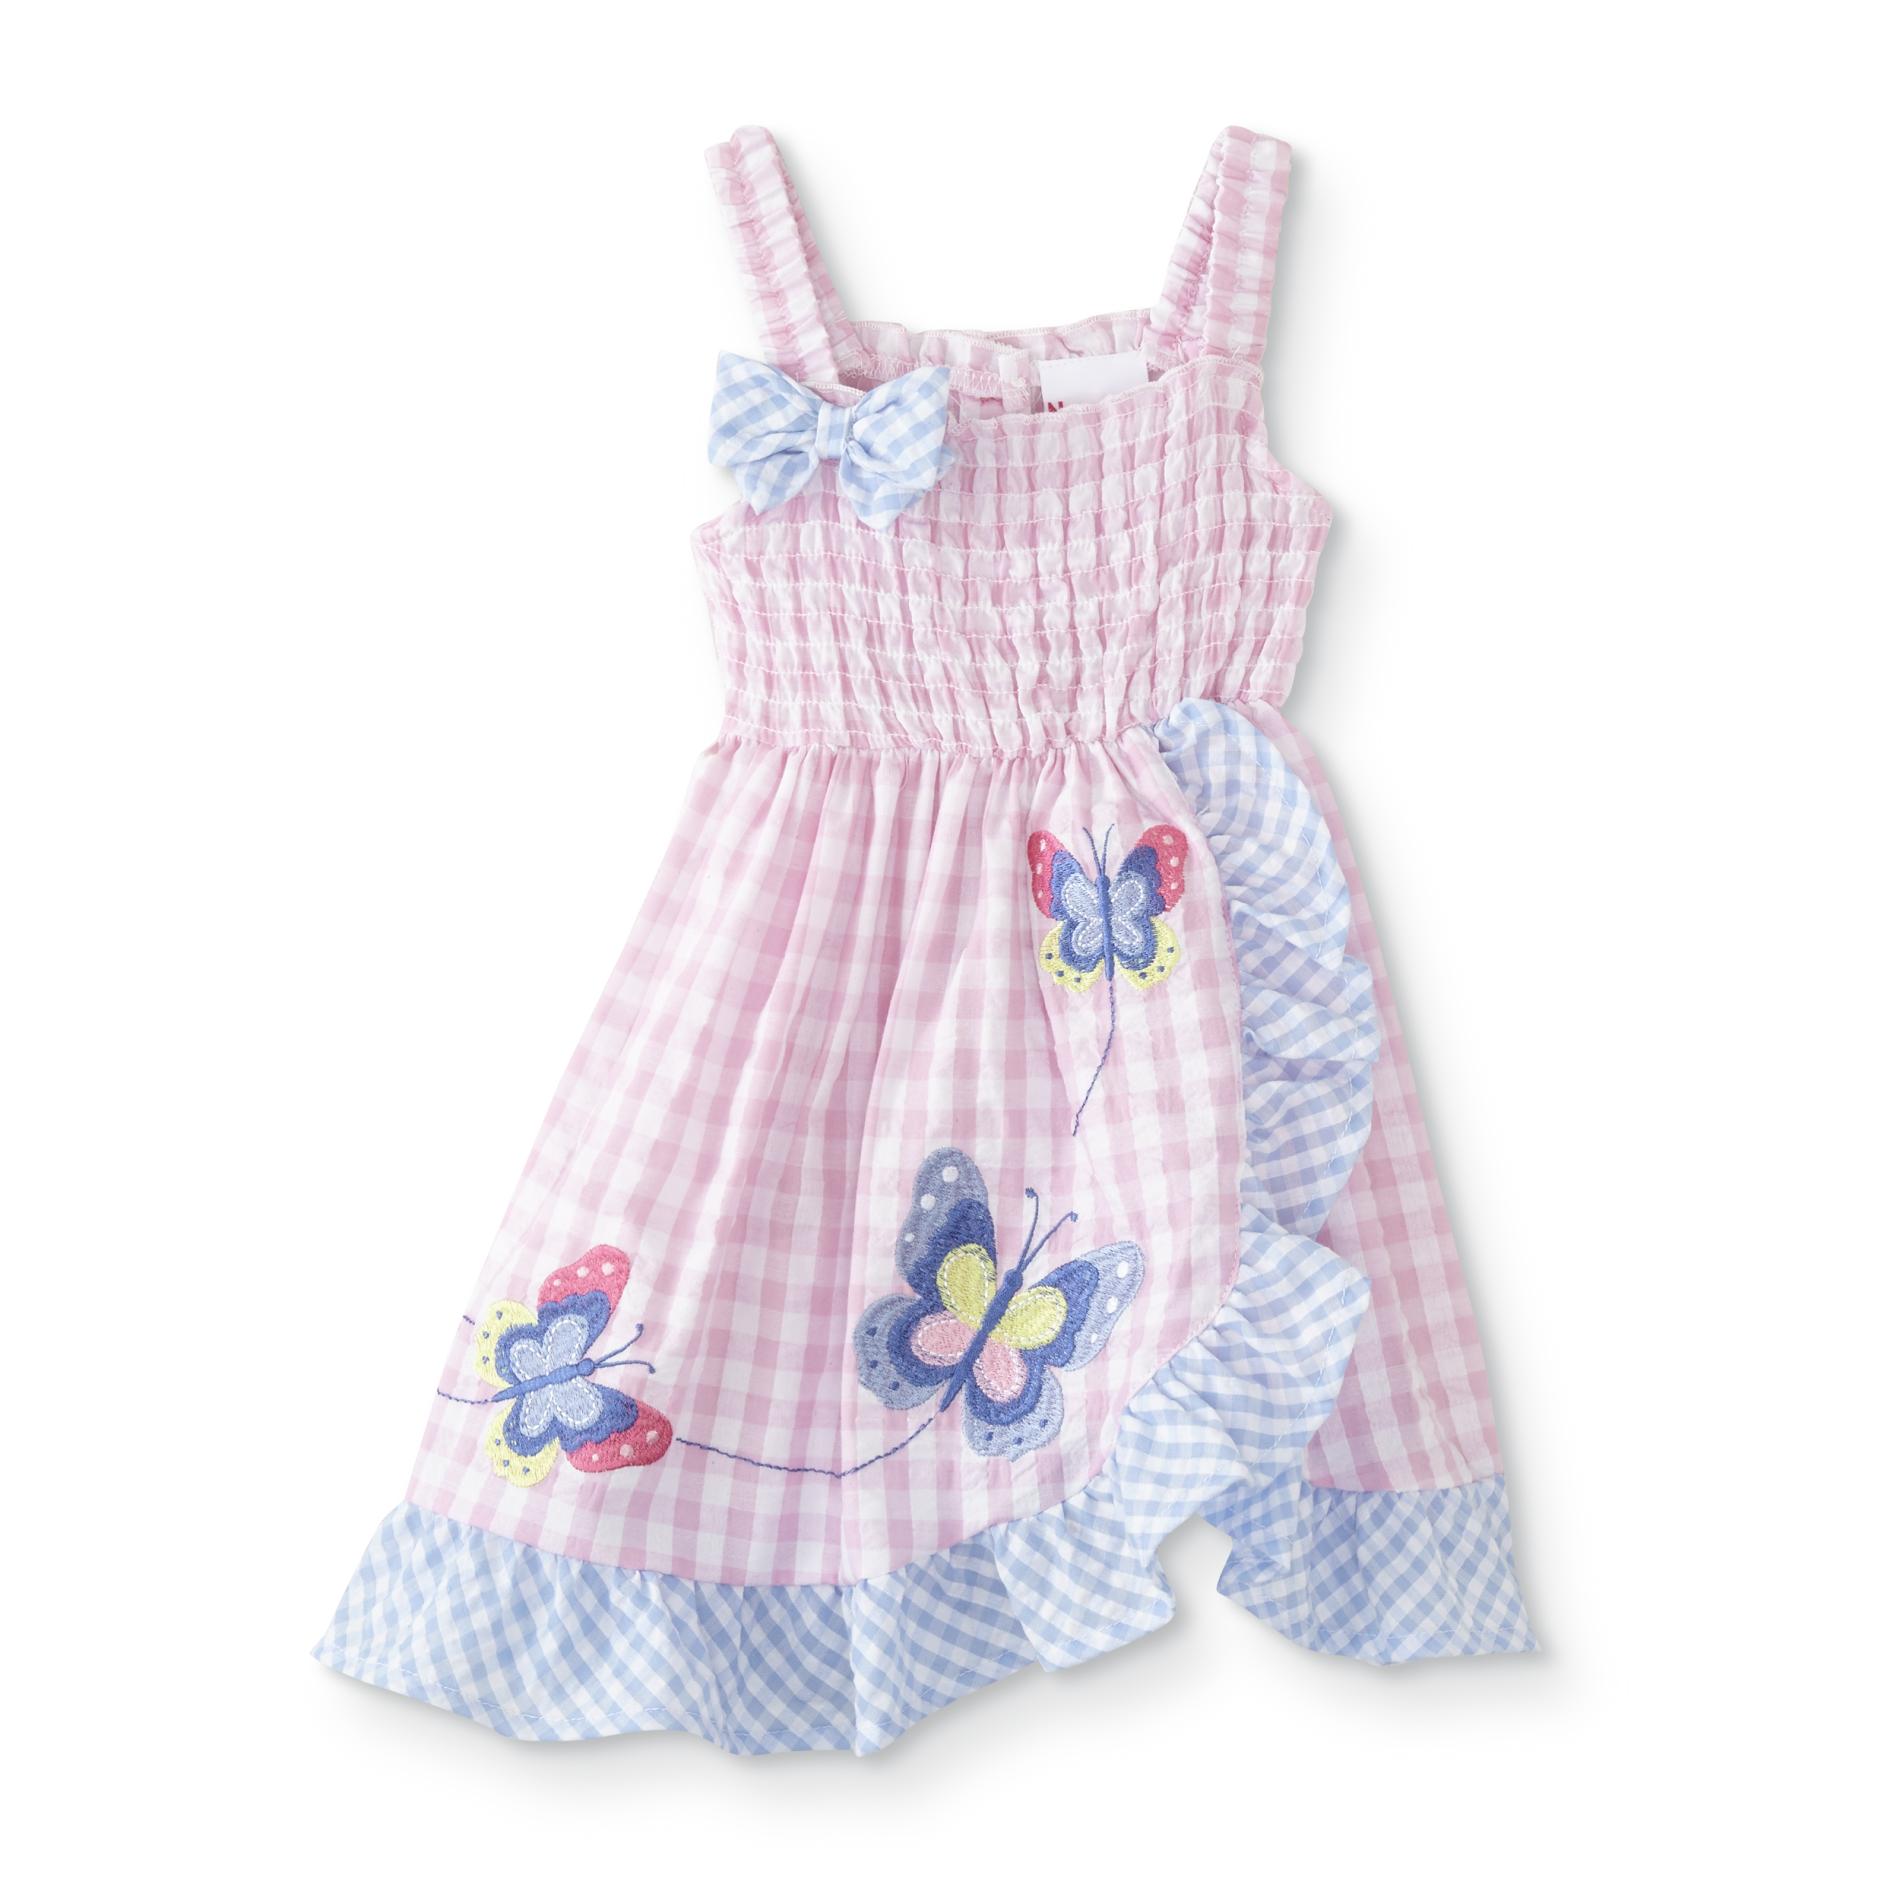 Toddler Girls' Smocked Woven Dress - Plaid/Butterfly